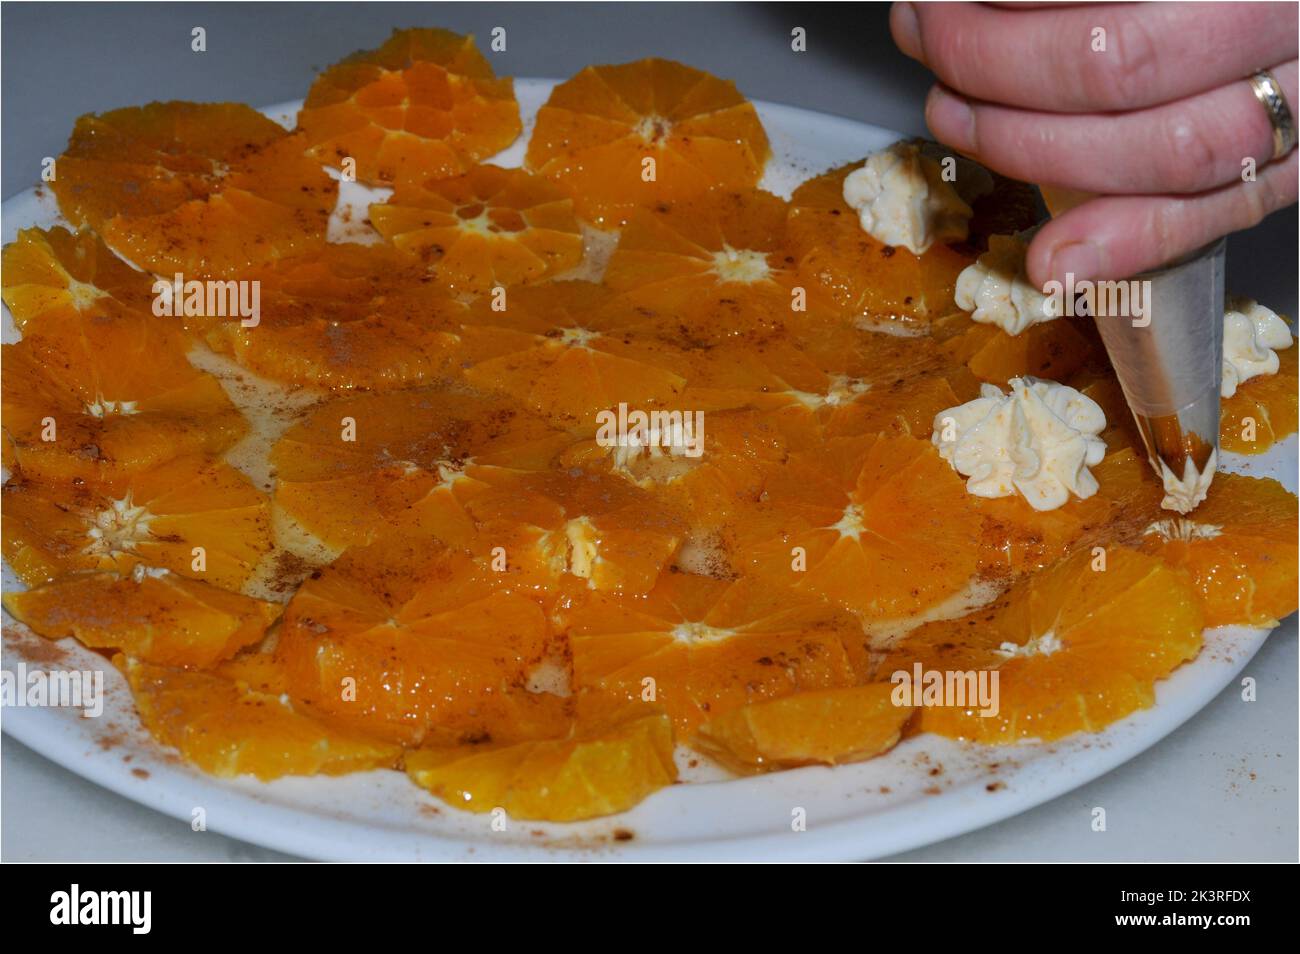 Juicy orange slices, flavored with sugar and cinnamon and fresh cheese Stock Photo